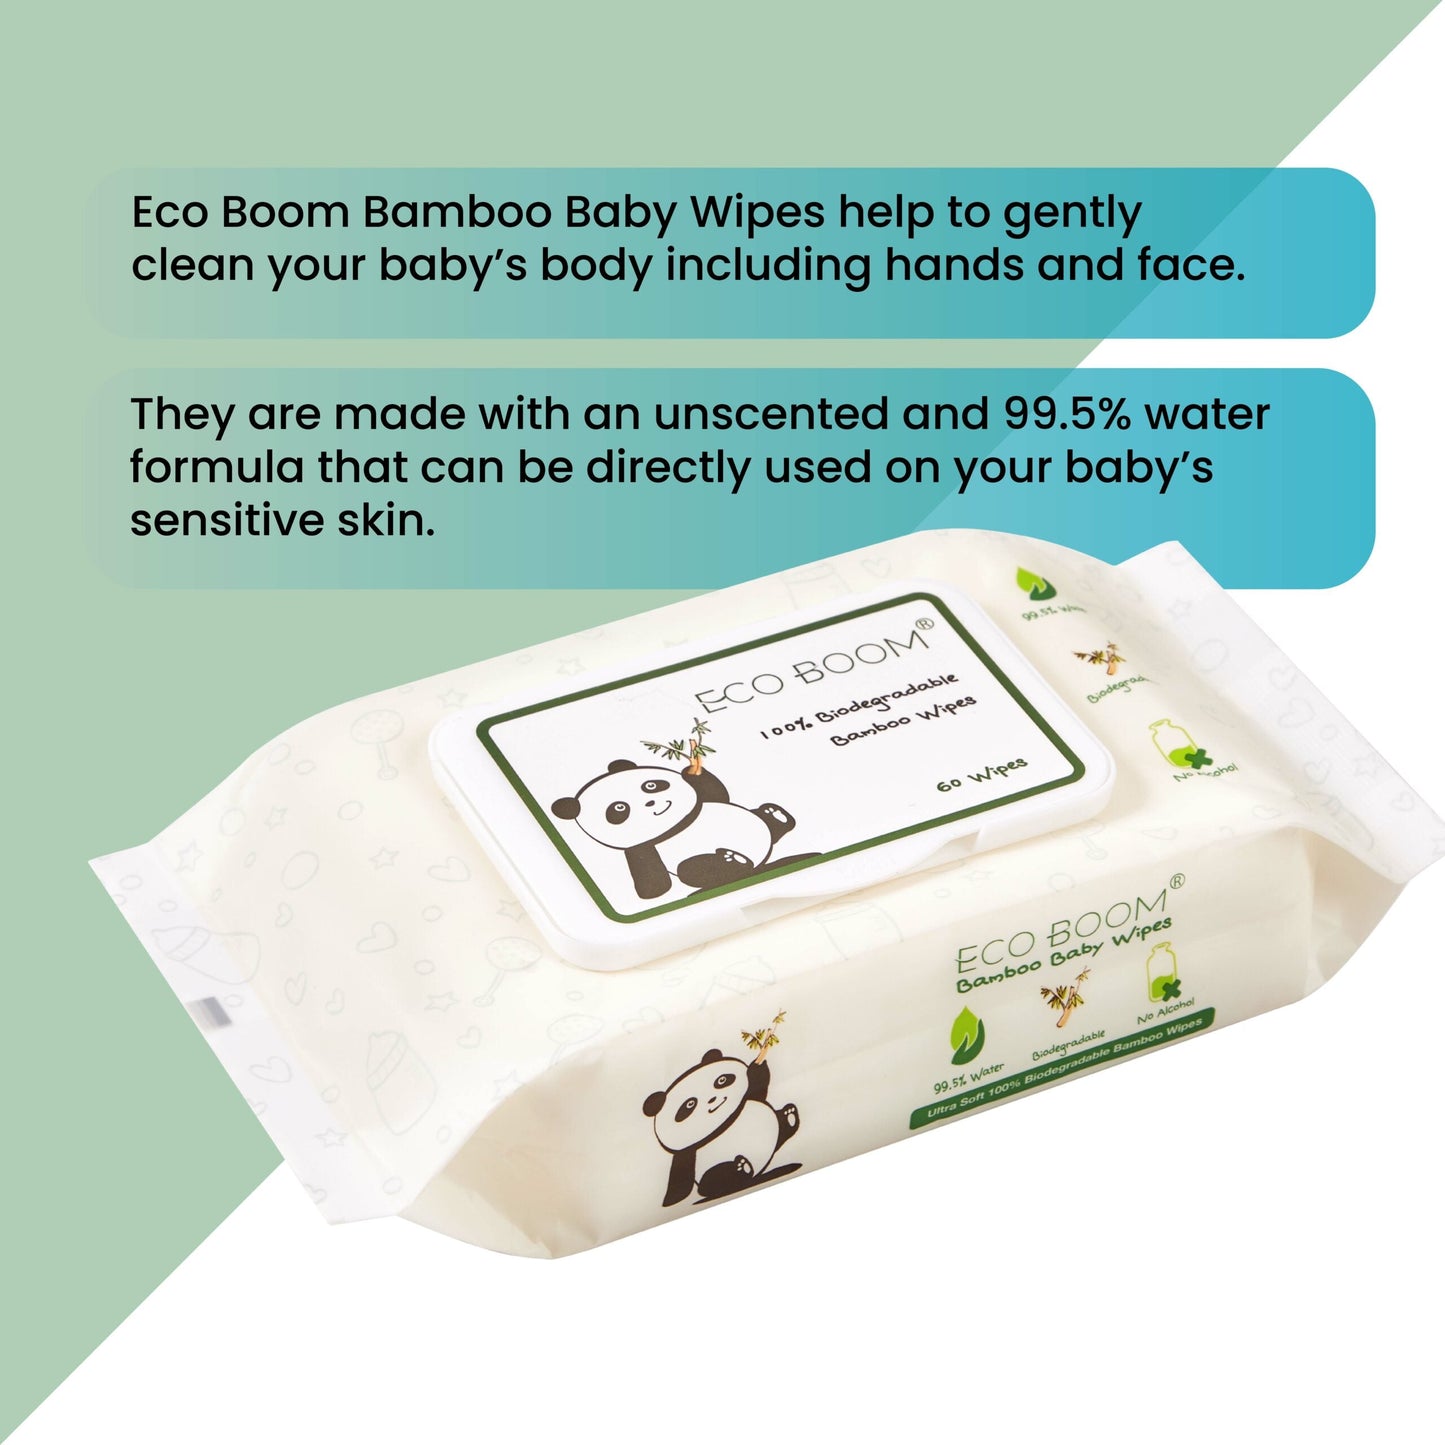 Eco Parenting Bundle- 2 Months Supply of Nappies, Nappy Bags and Baby Wipes (Large) - Eco Green Living